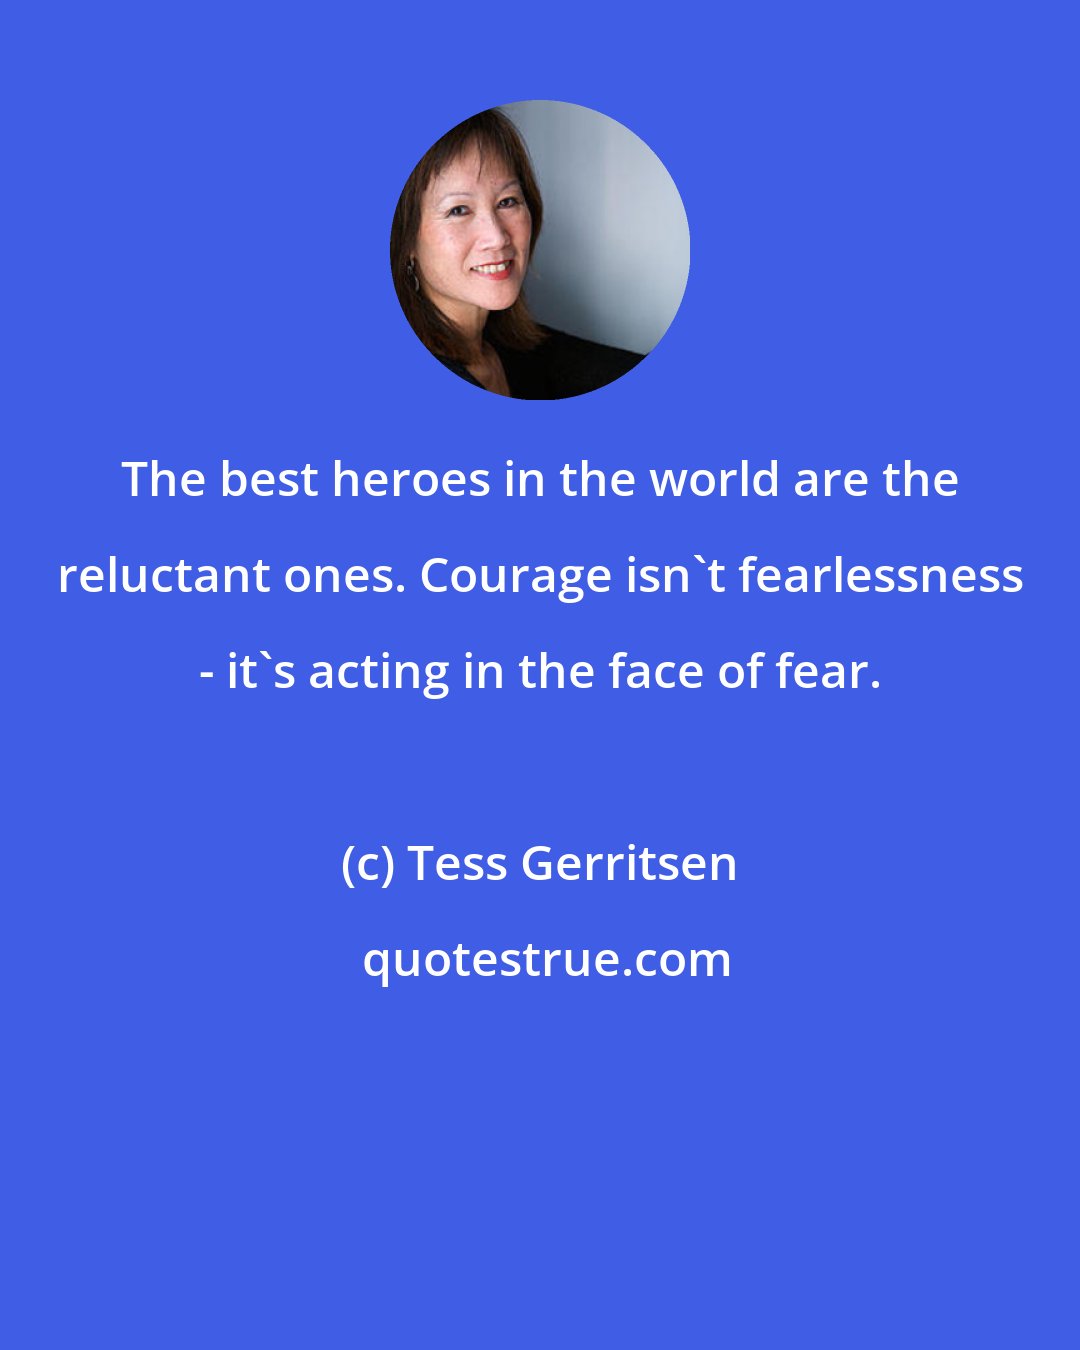 Tess Gerritsen: The best heroes in the world are the reluctant ones. Courage isn't fearlessness - it's acting in the face of fear.